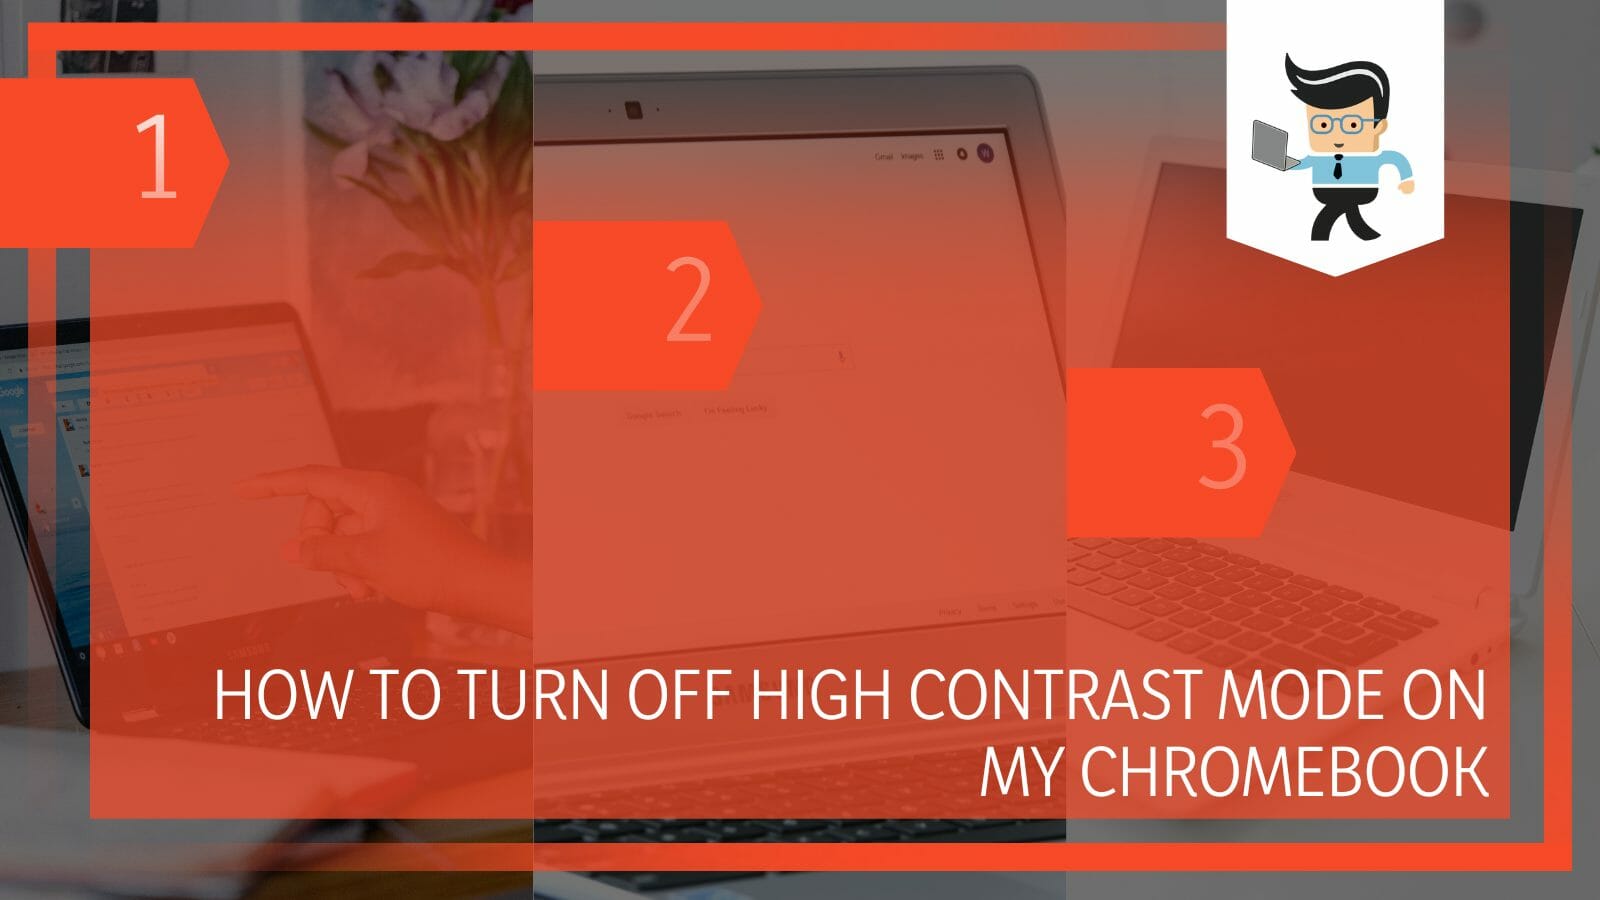 Turn off High Contrast Mode on My Chromebook